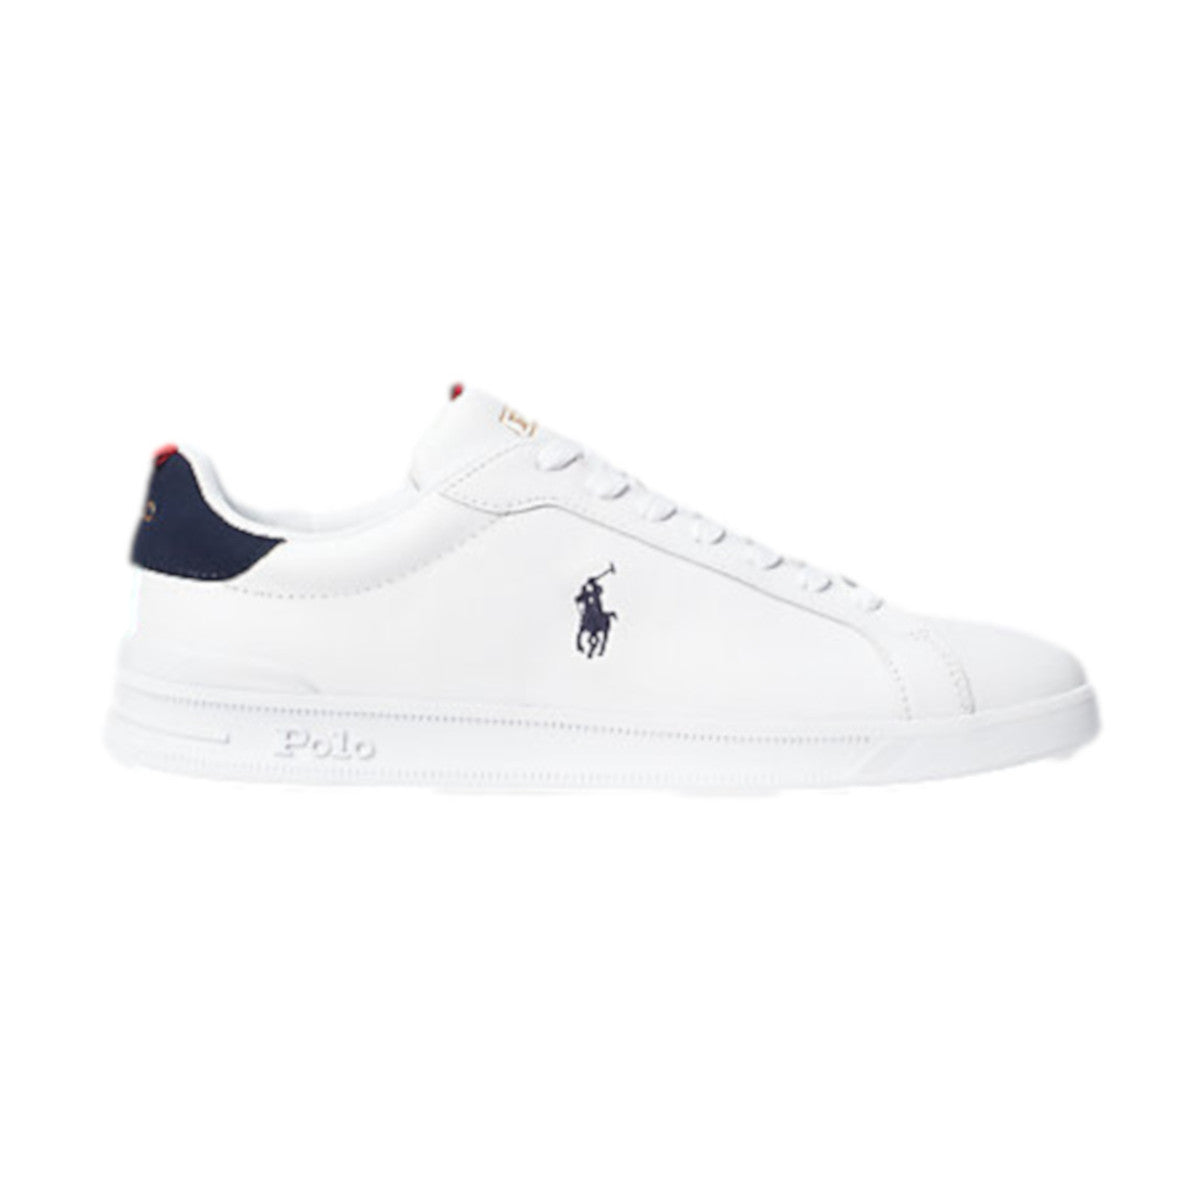 Polo Ralph Lauren HRT CT 11 Sneakers Low Top 003 White/Navy/Red